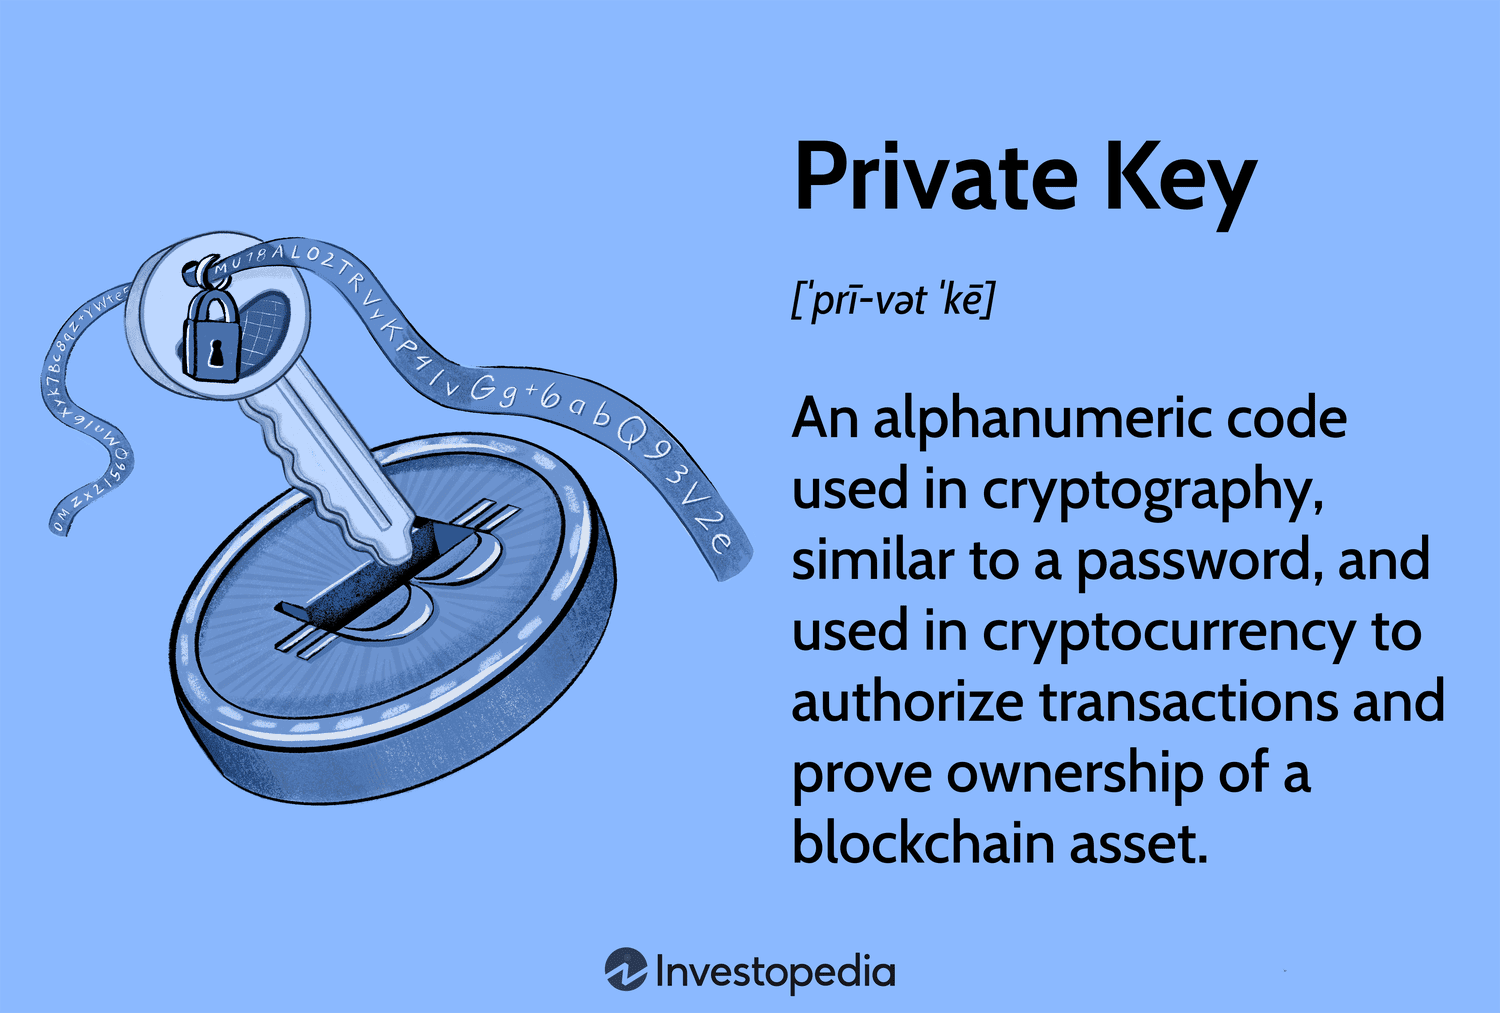 Can You Guess A Bitcoin Private Key?